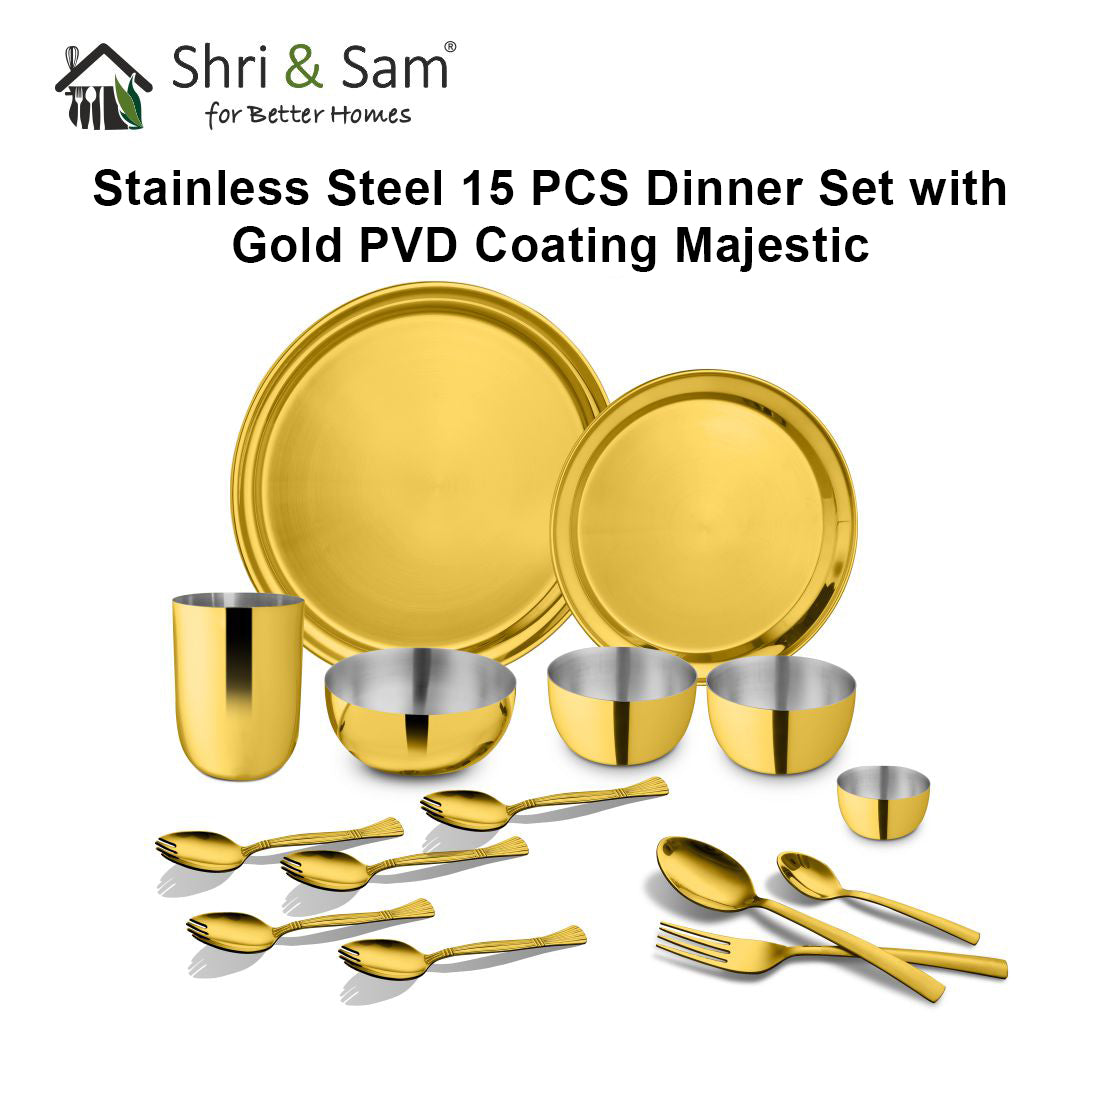 Stainless Steel 15 PCS Dinner Set with Gold PVD Coating Majestic